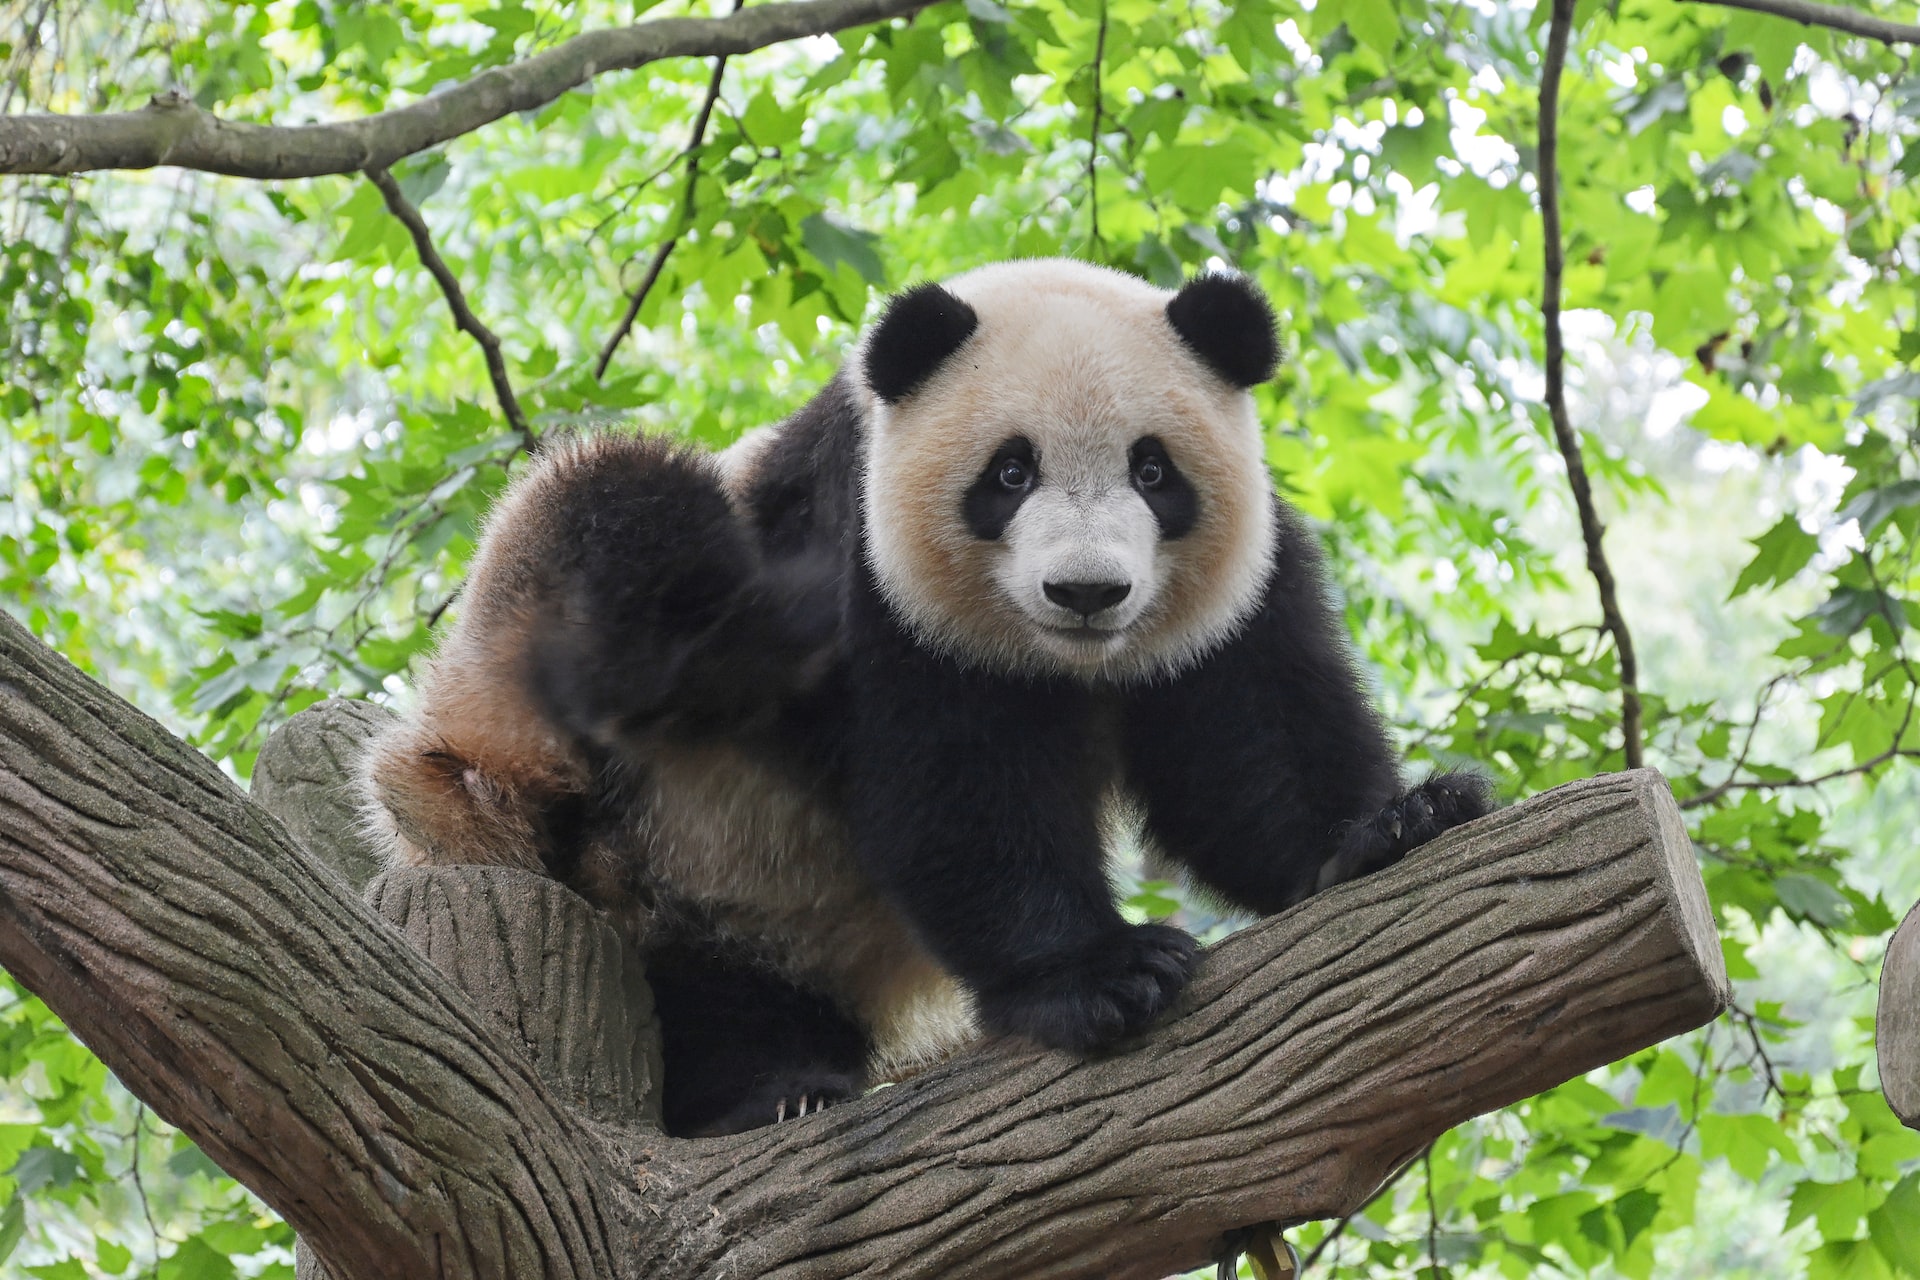 Panda-tastic: The Fascinating World of the Black-and-White and Bamboo-Eating Mammal